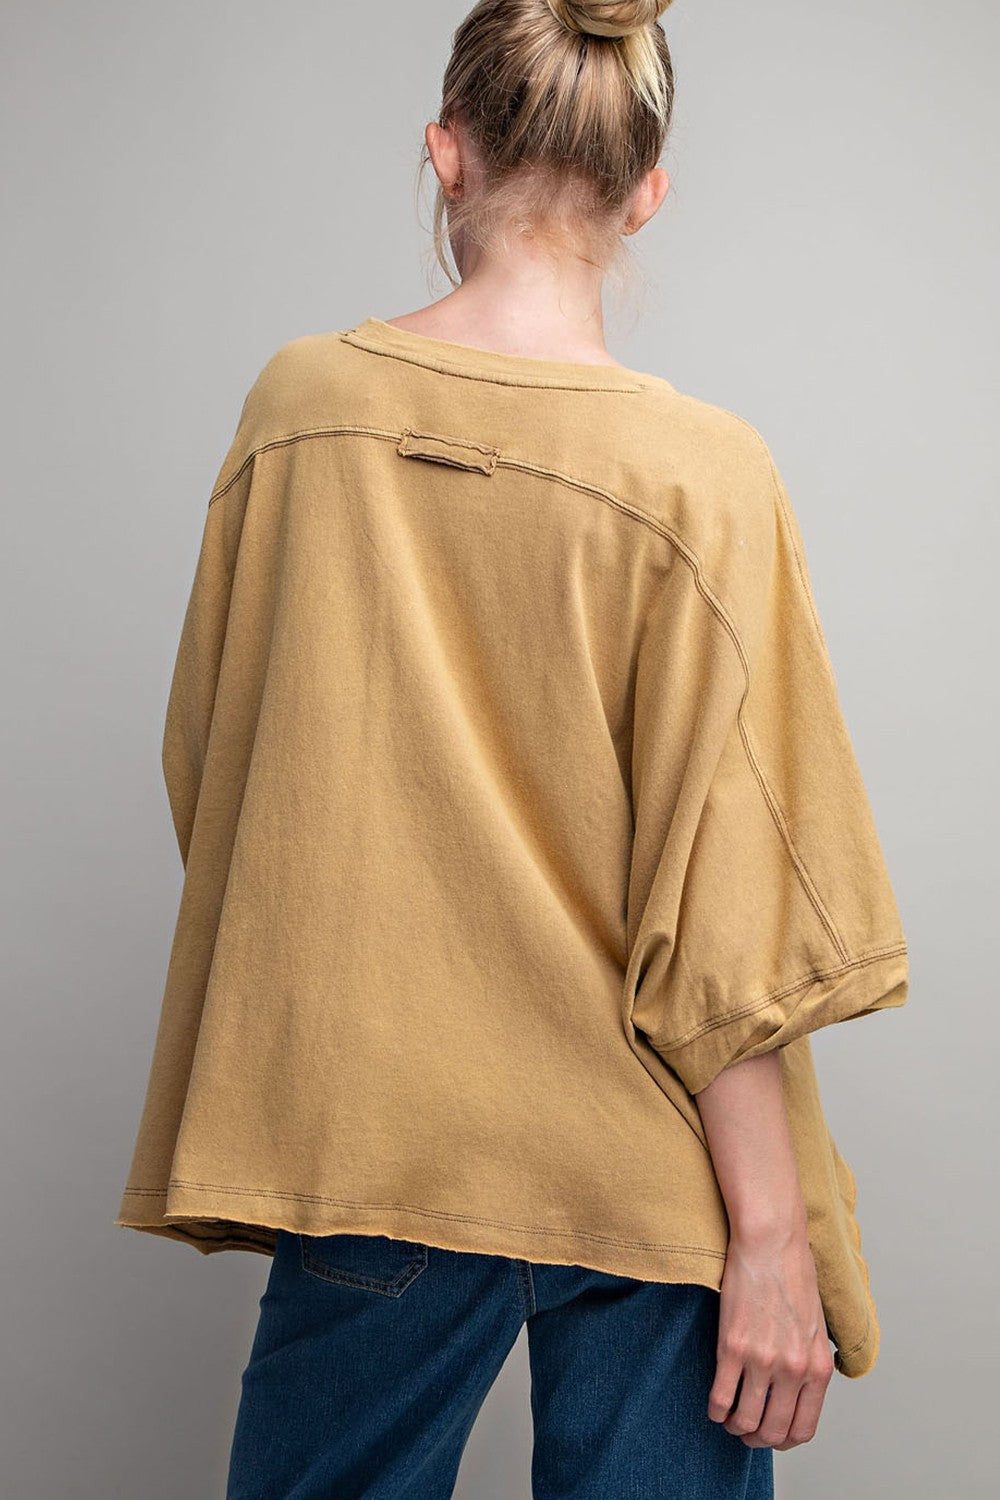 Mineral Washed Oversized Tee